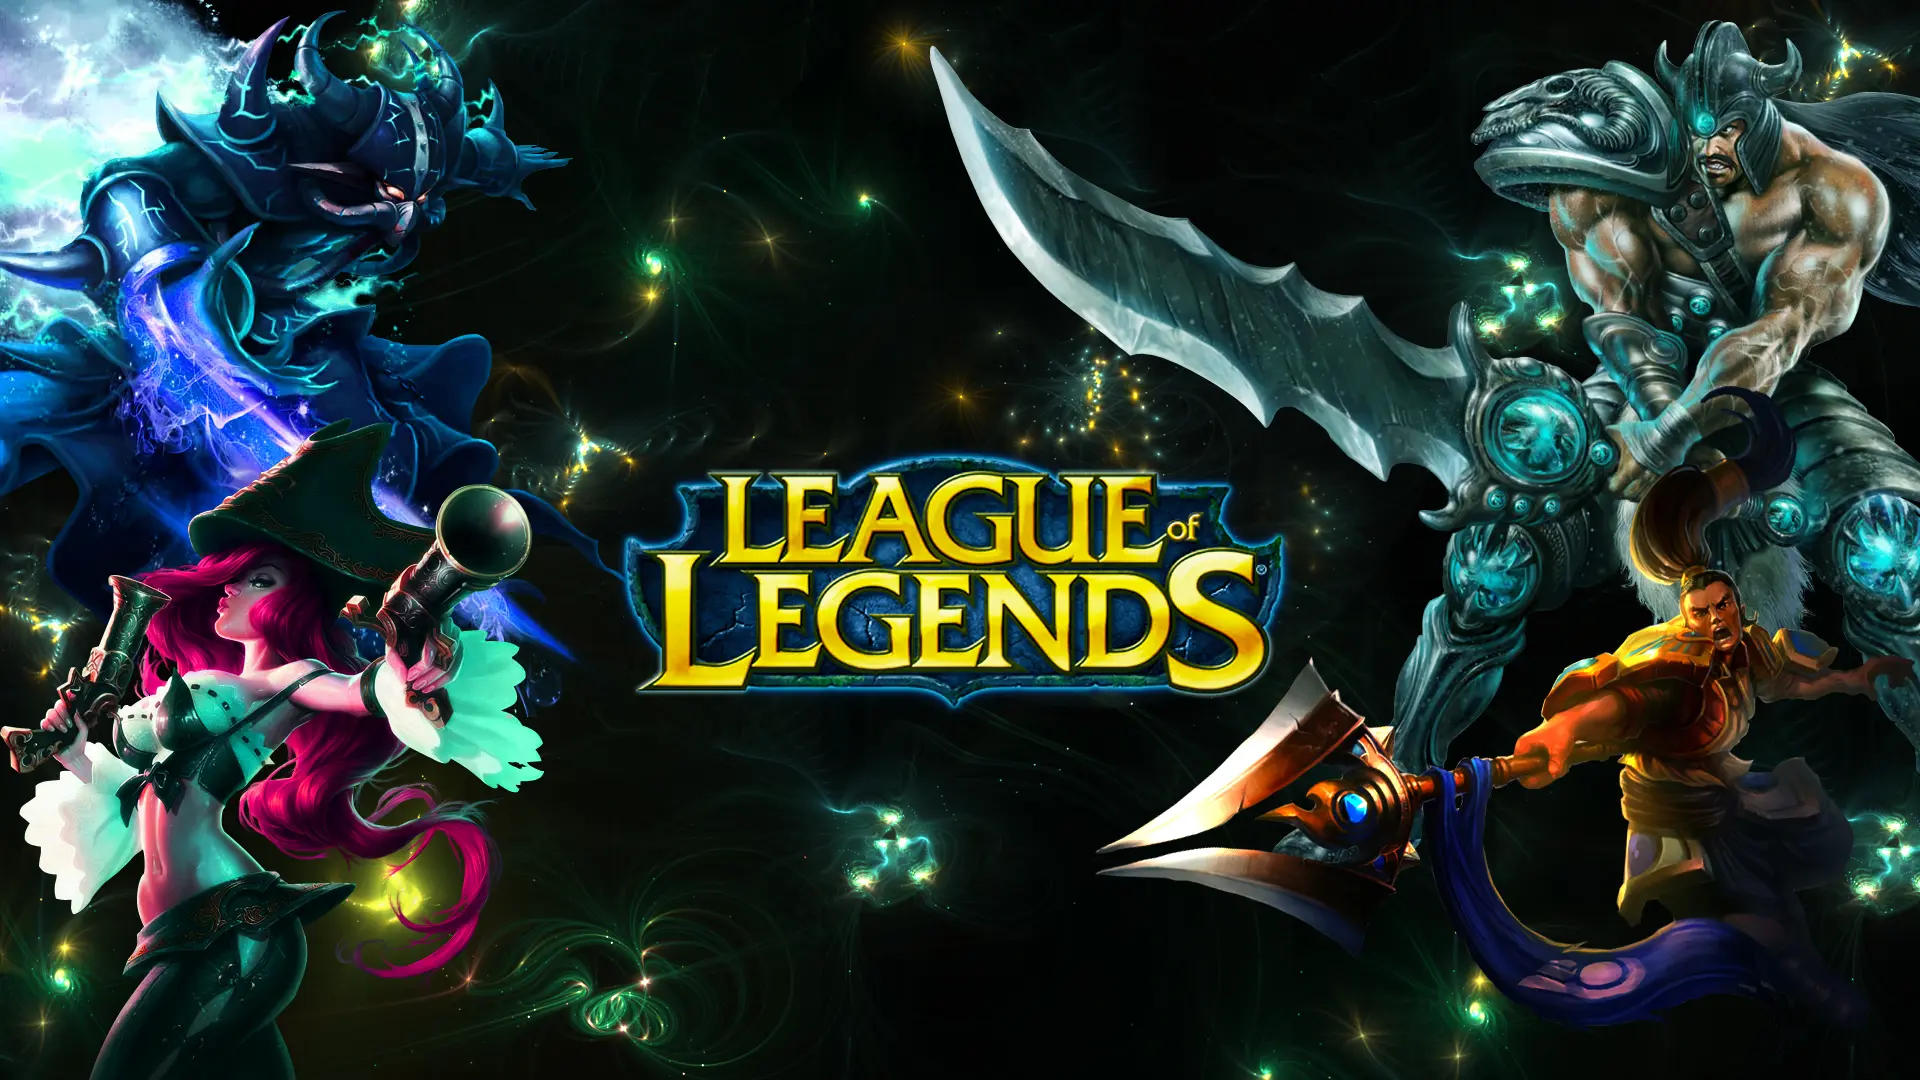 Game League of Legends wallpaper 111 | Background Image